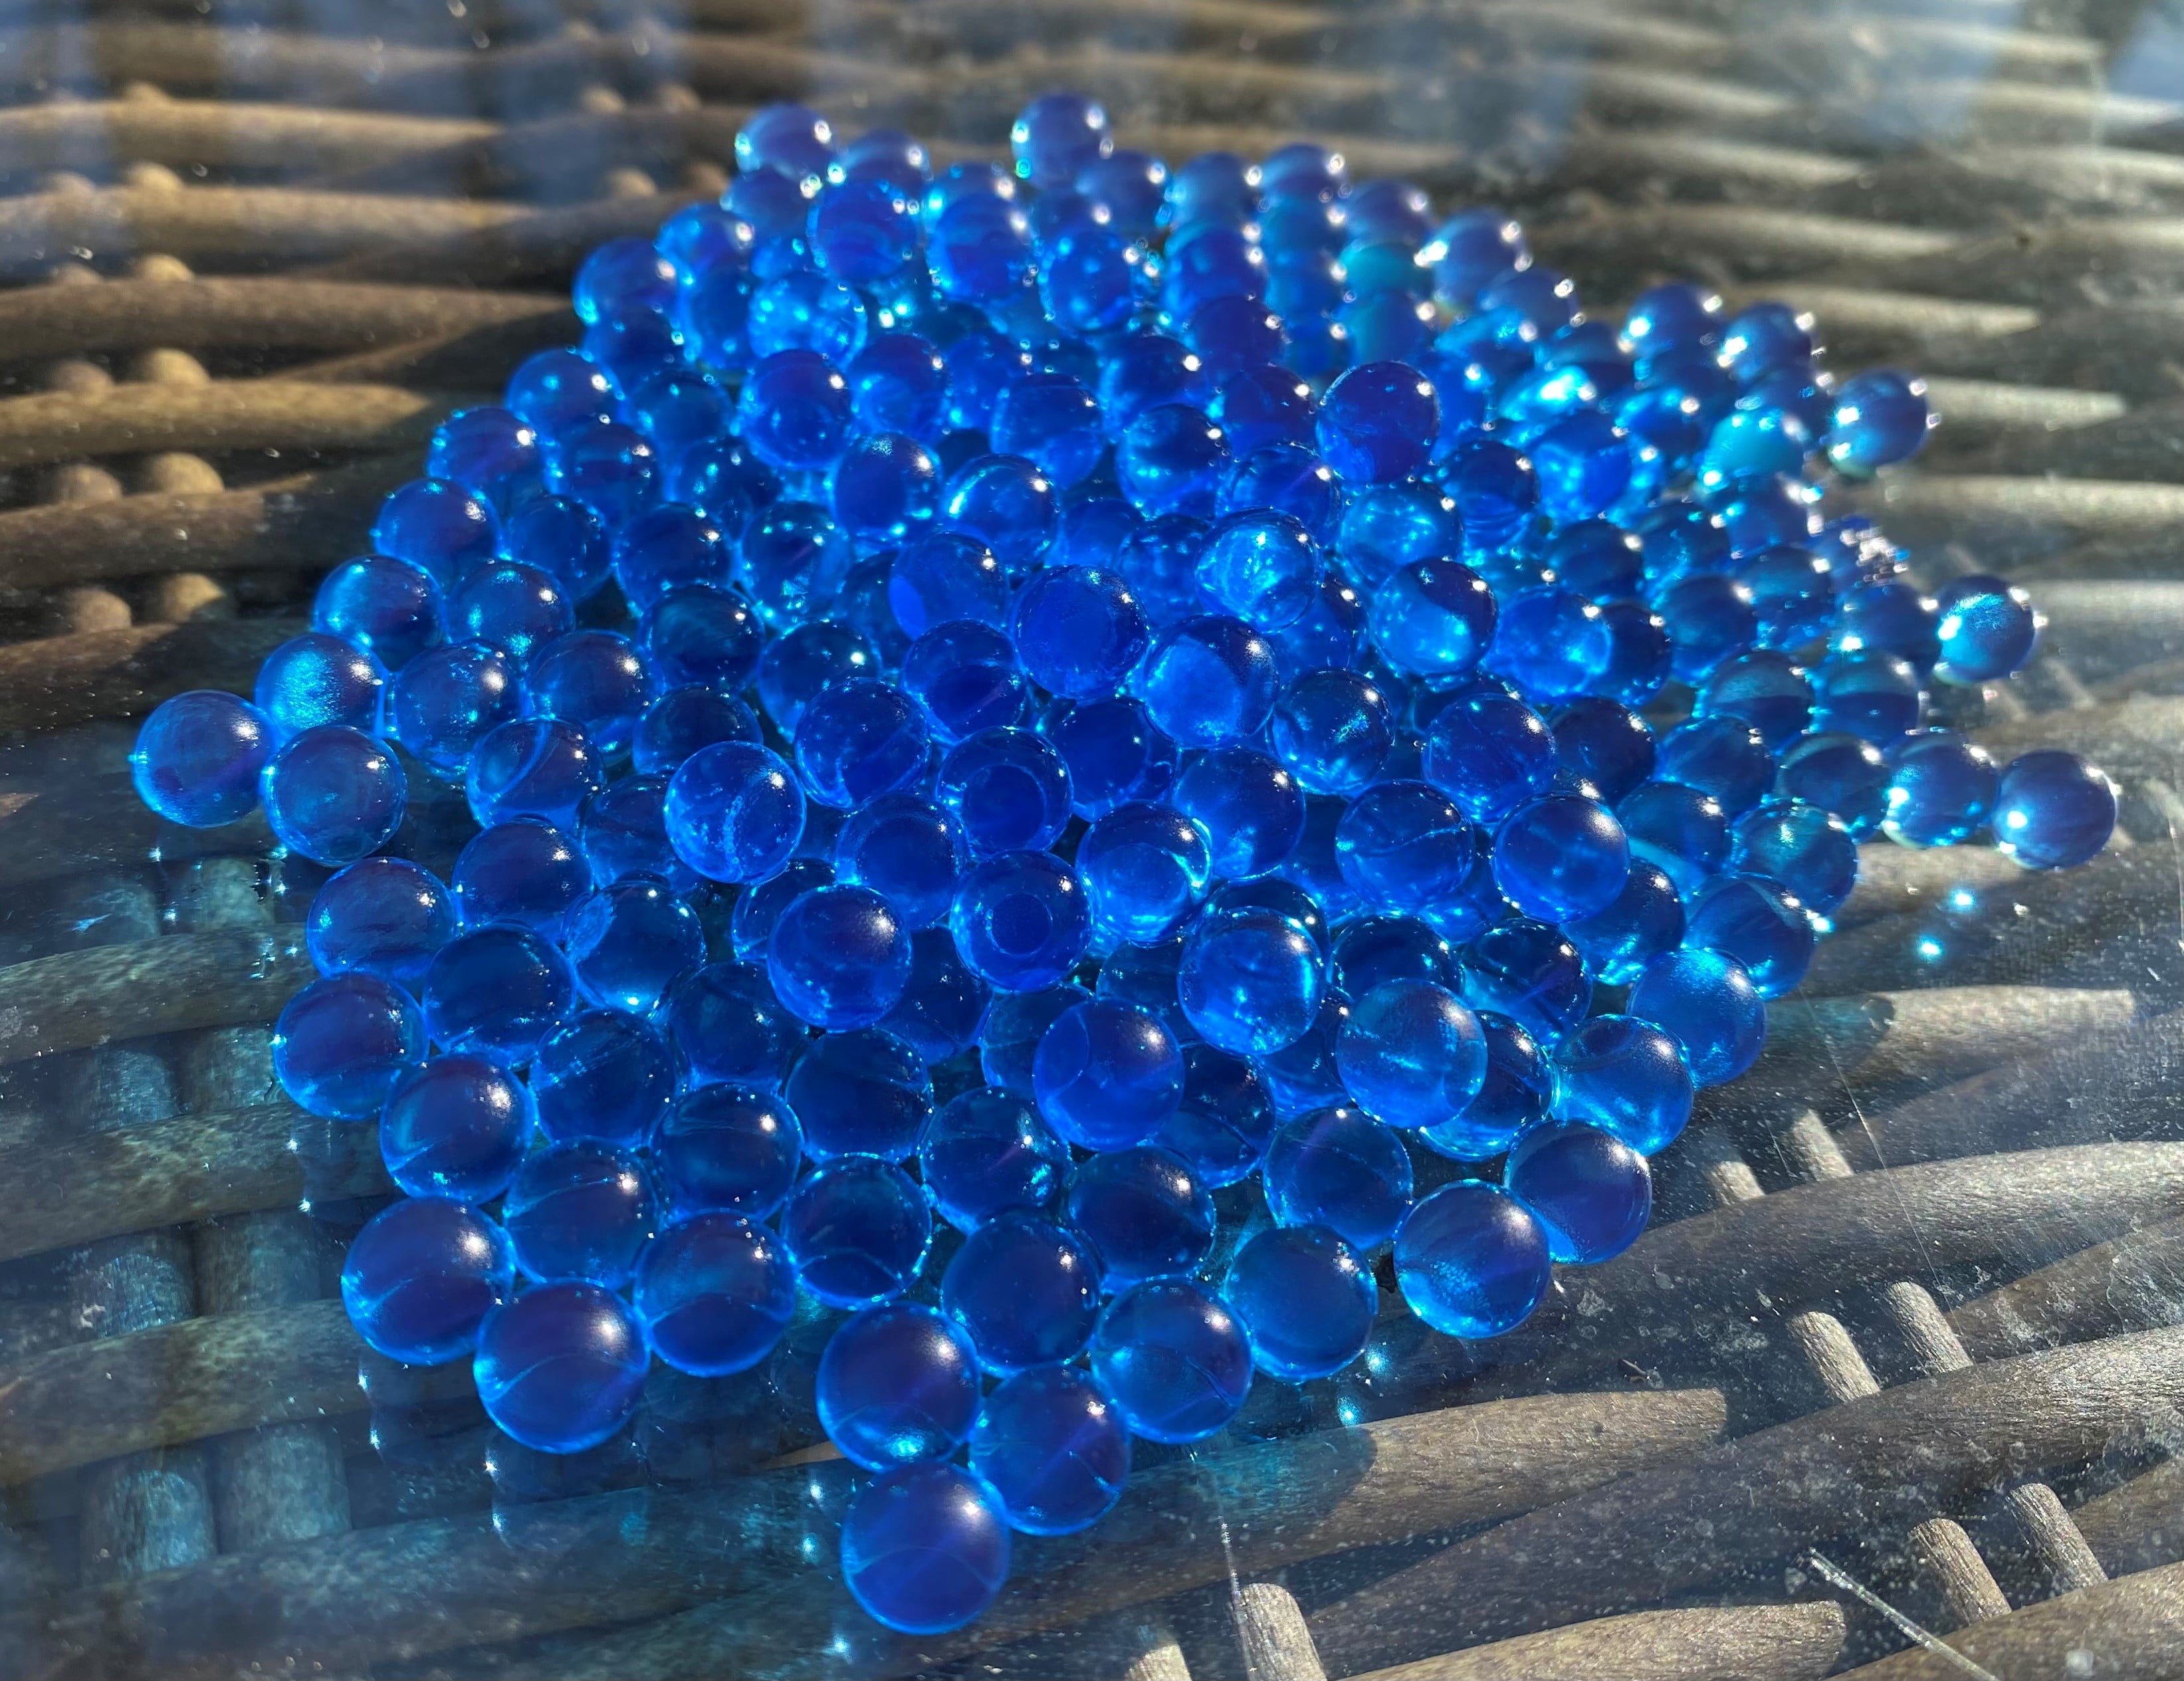 Lightning Blaster Blue Water Bead Ammo 20K Refill 7.5mm in Pour Nozzle Bag Age 14+